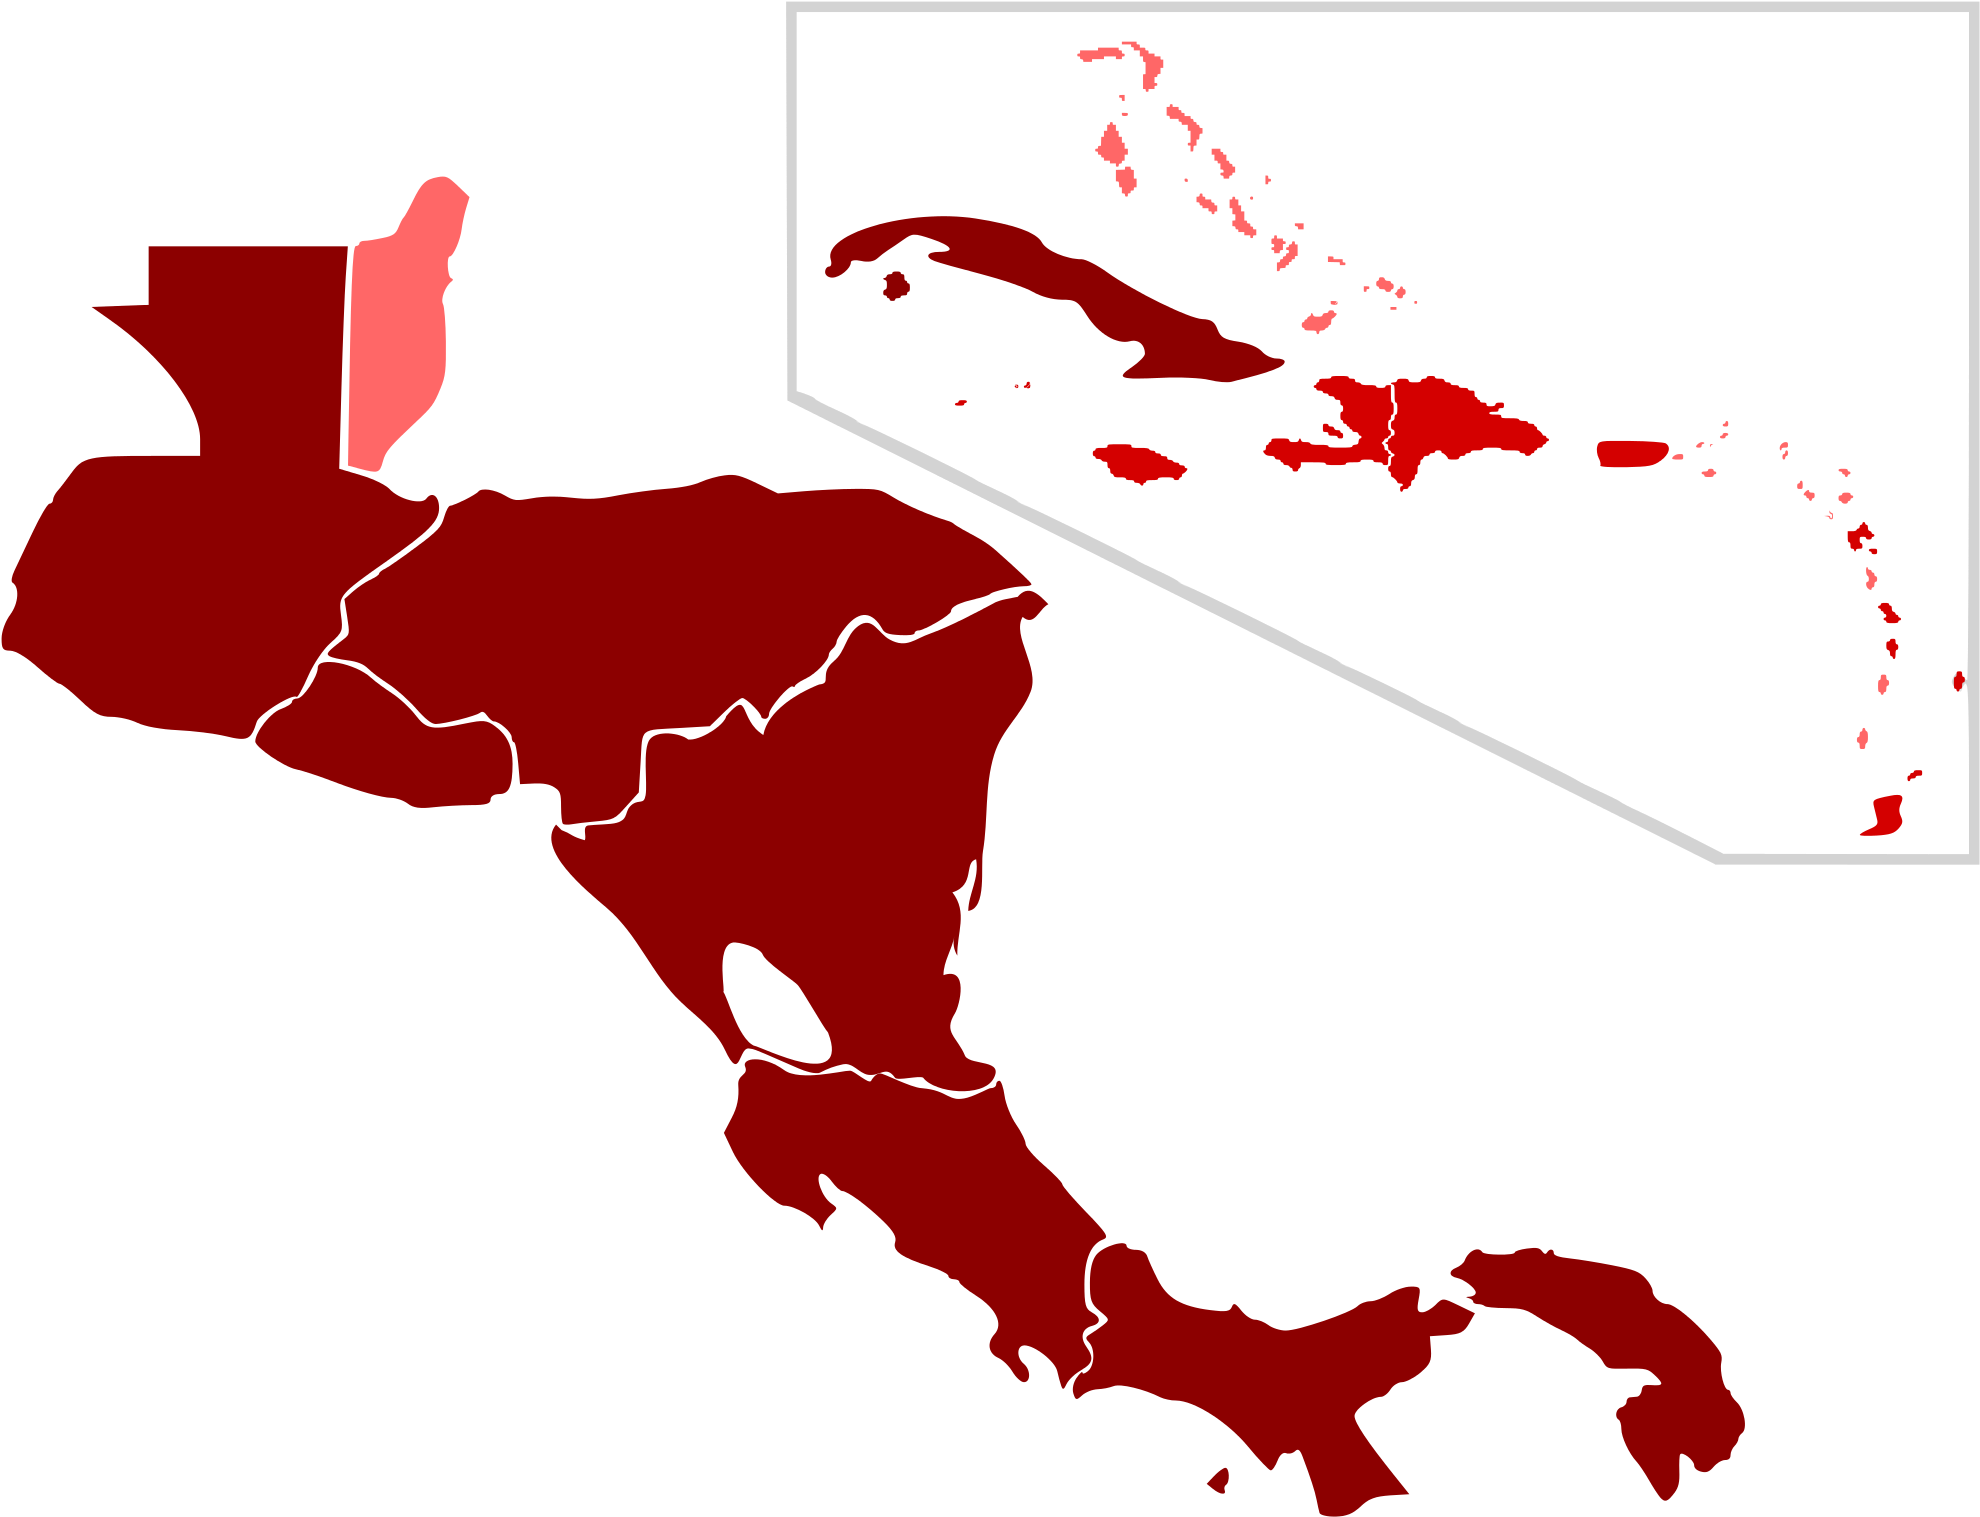 H1n1 Central America Map By Confirmed Cases - H1n1 Central America Map By Confirmed Cases (2000x1531)